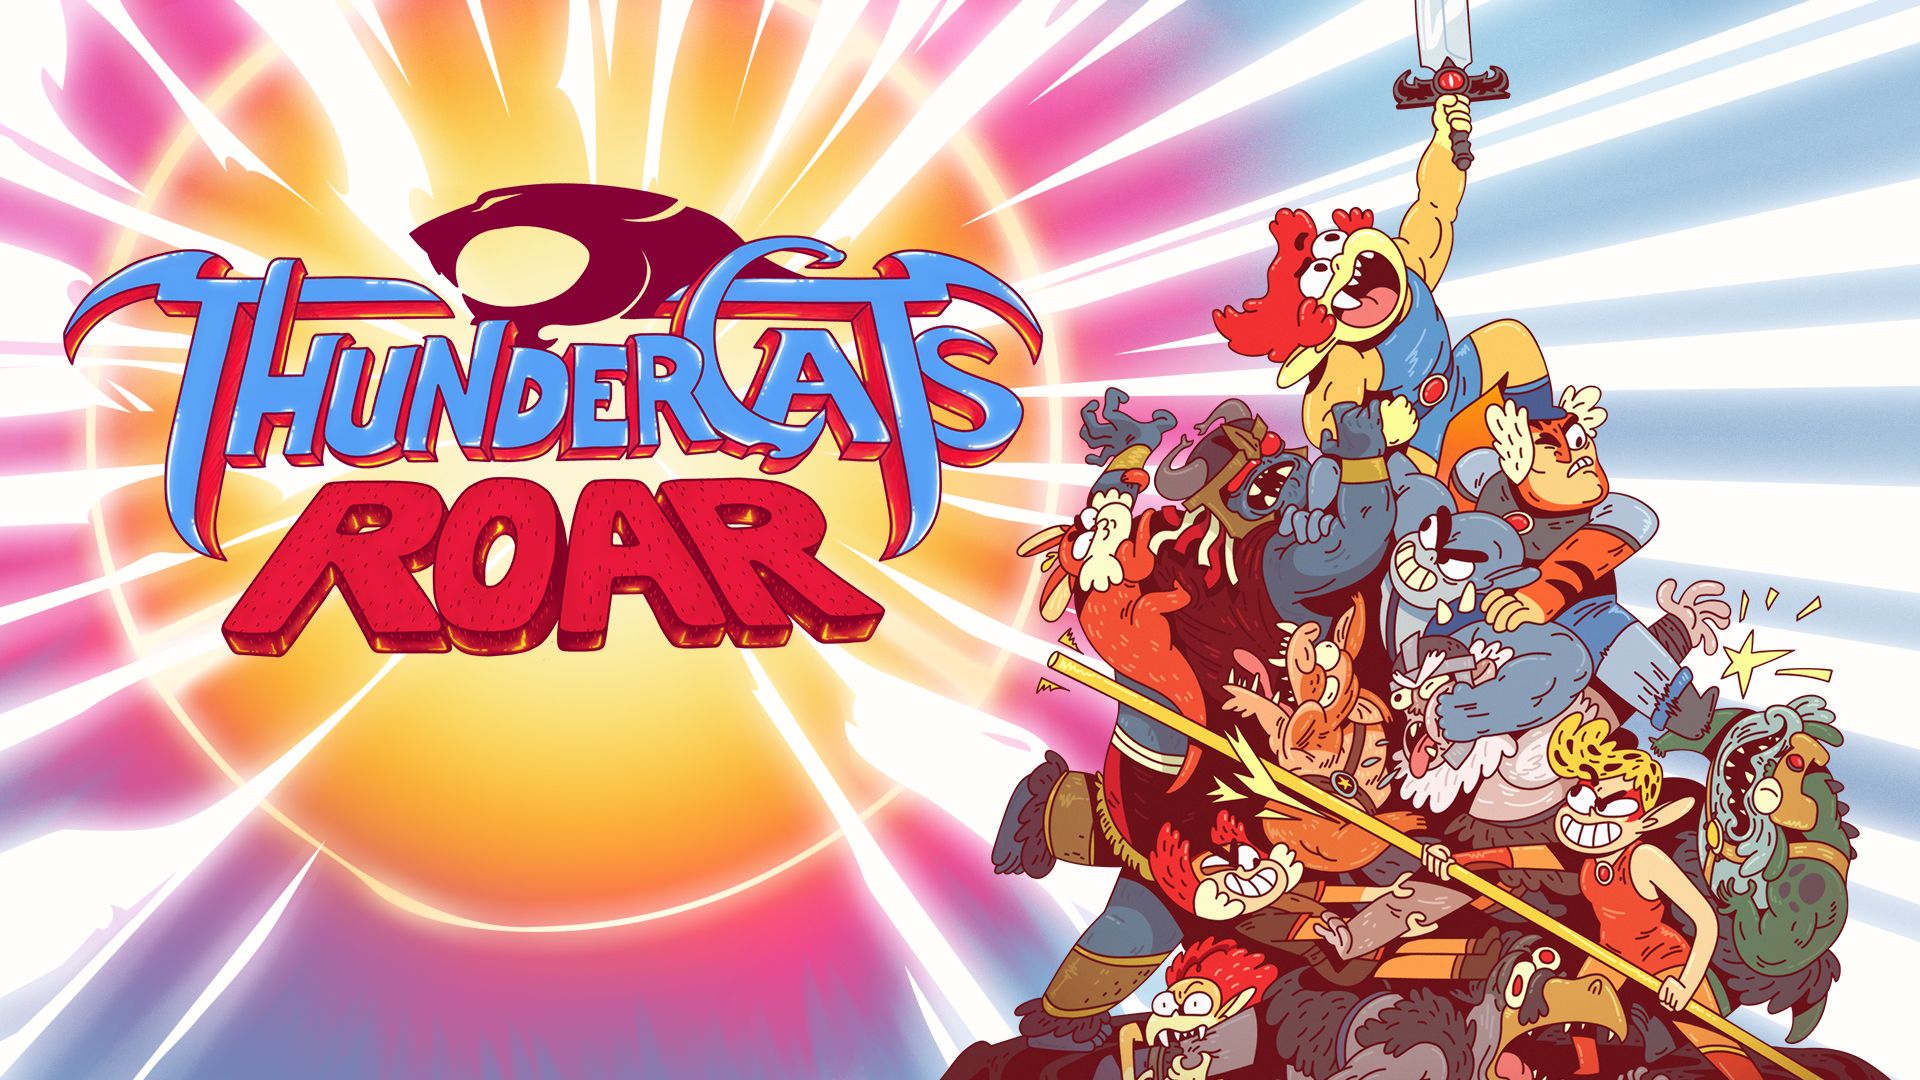 Review: Thundercats Roar One Under Grace